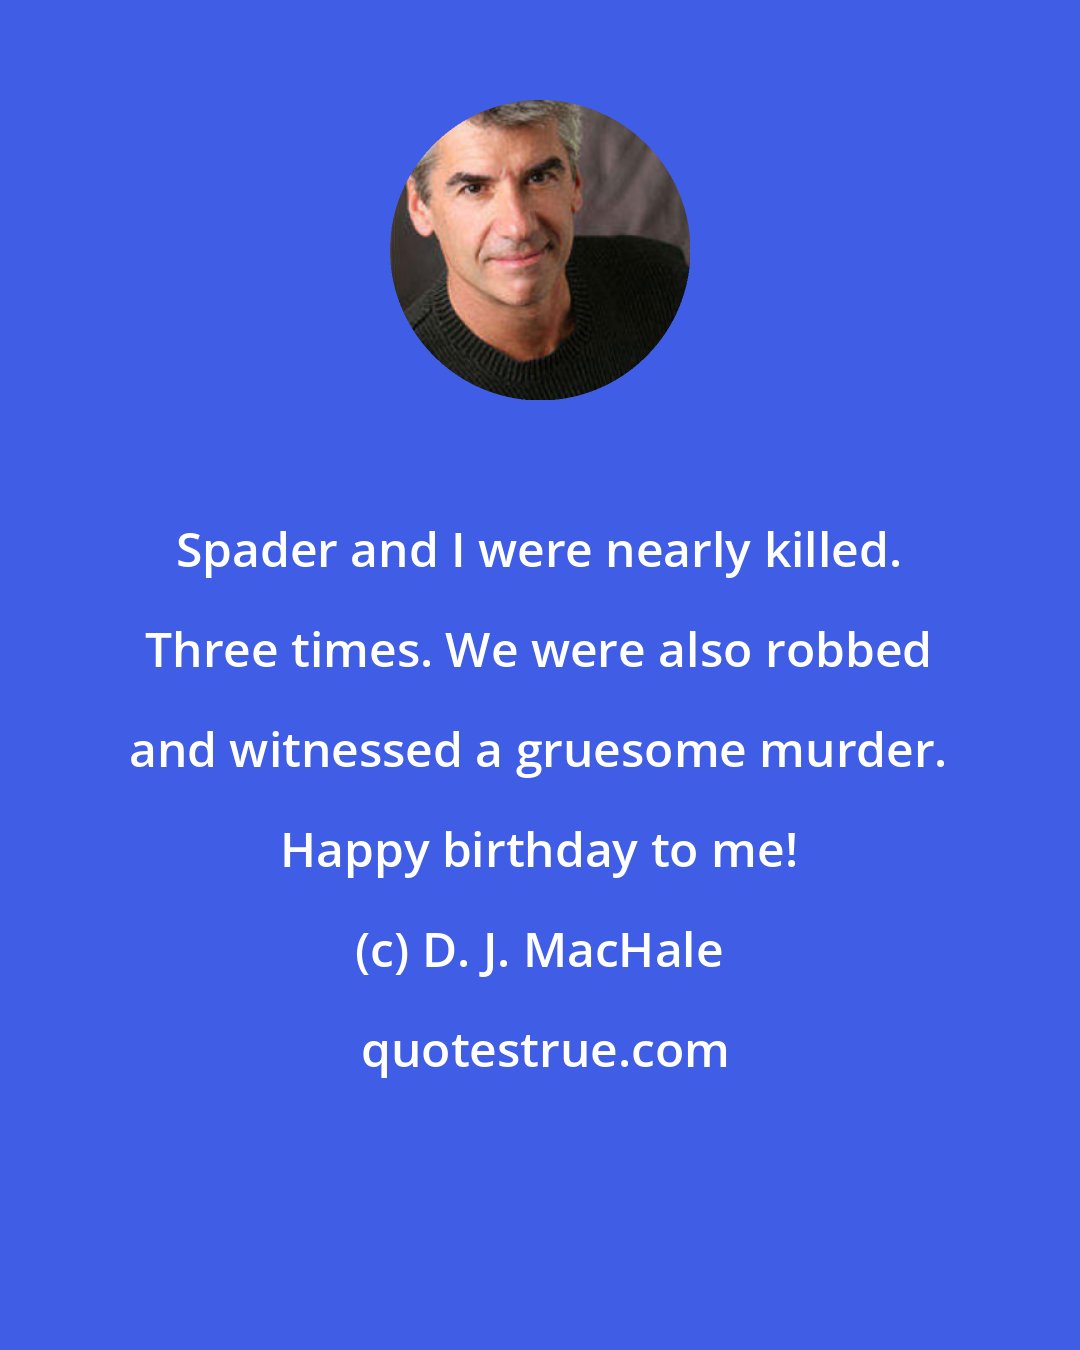 D. J. MacHale: Spader and I were nearly killed. Three times. We were also robbed and witnessed a gruesome murder. Happy birthday to me!